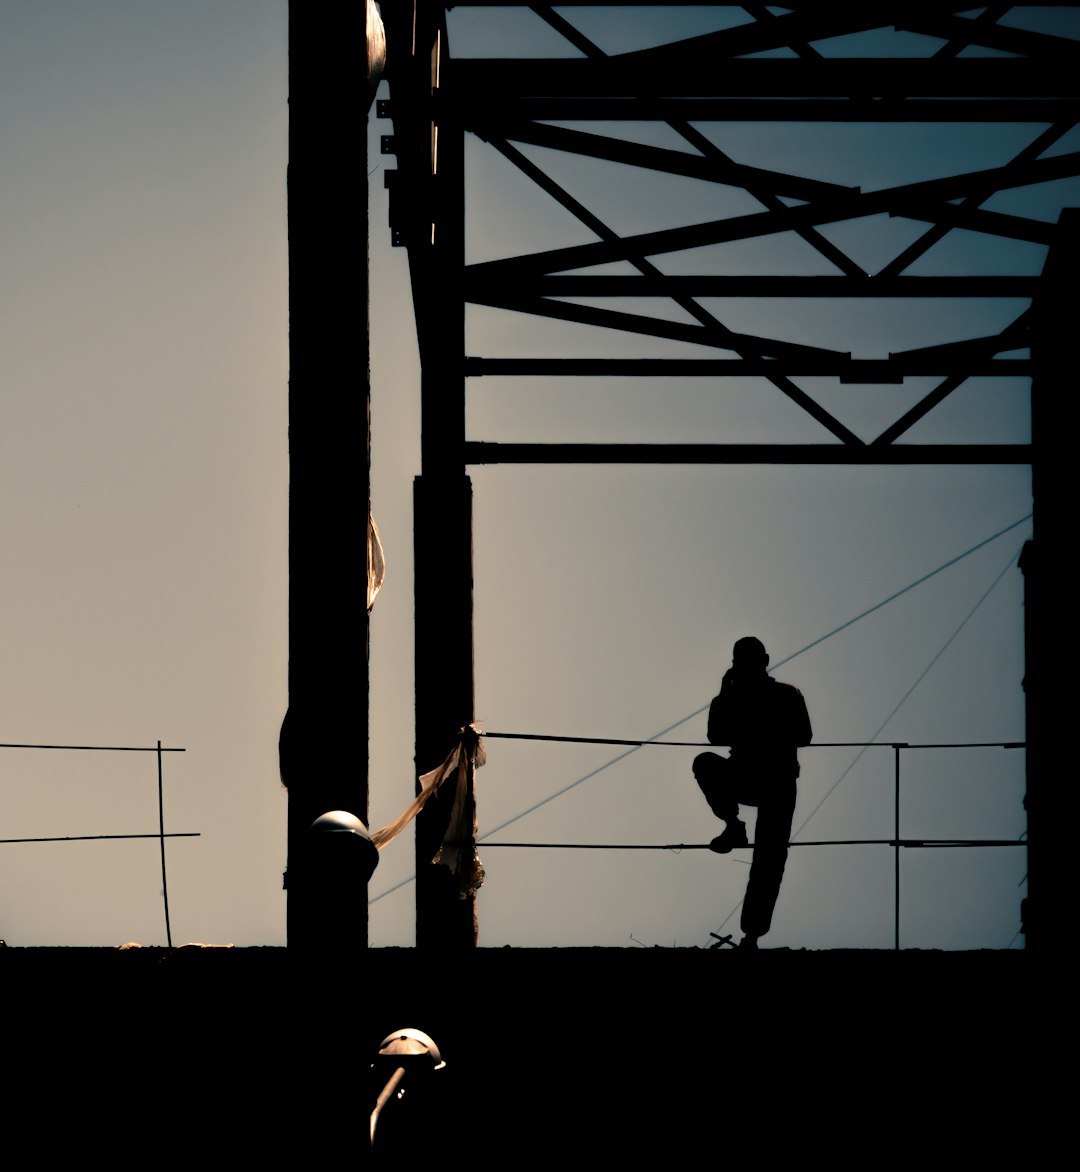 silhouette of man and woman standing on a metal frame ladder during daytime